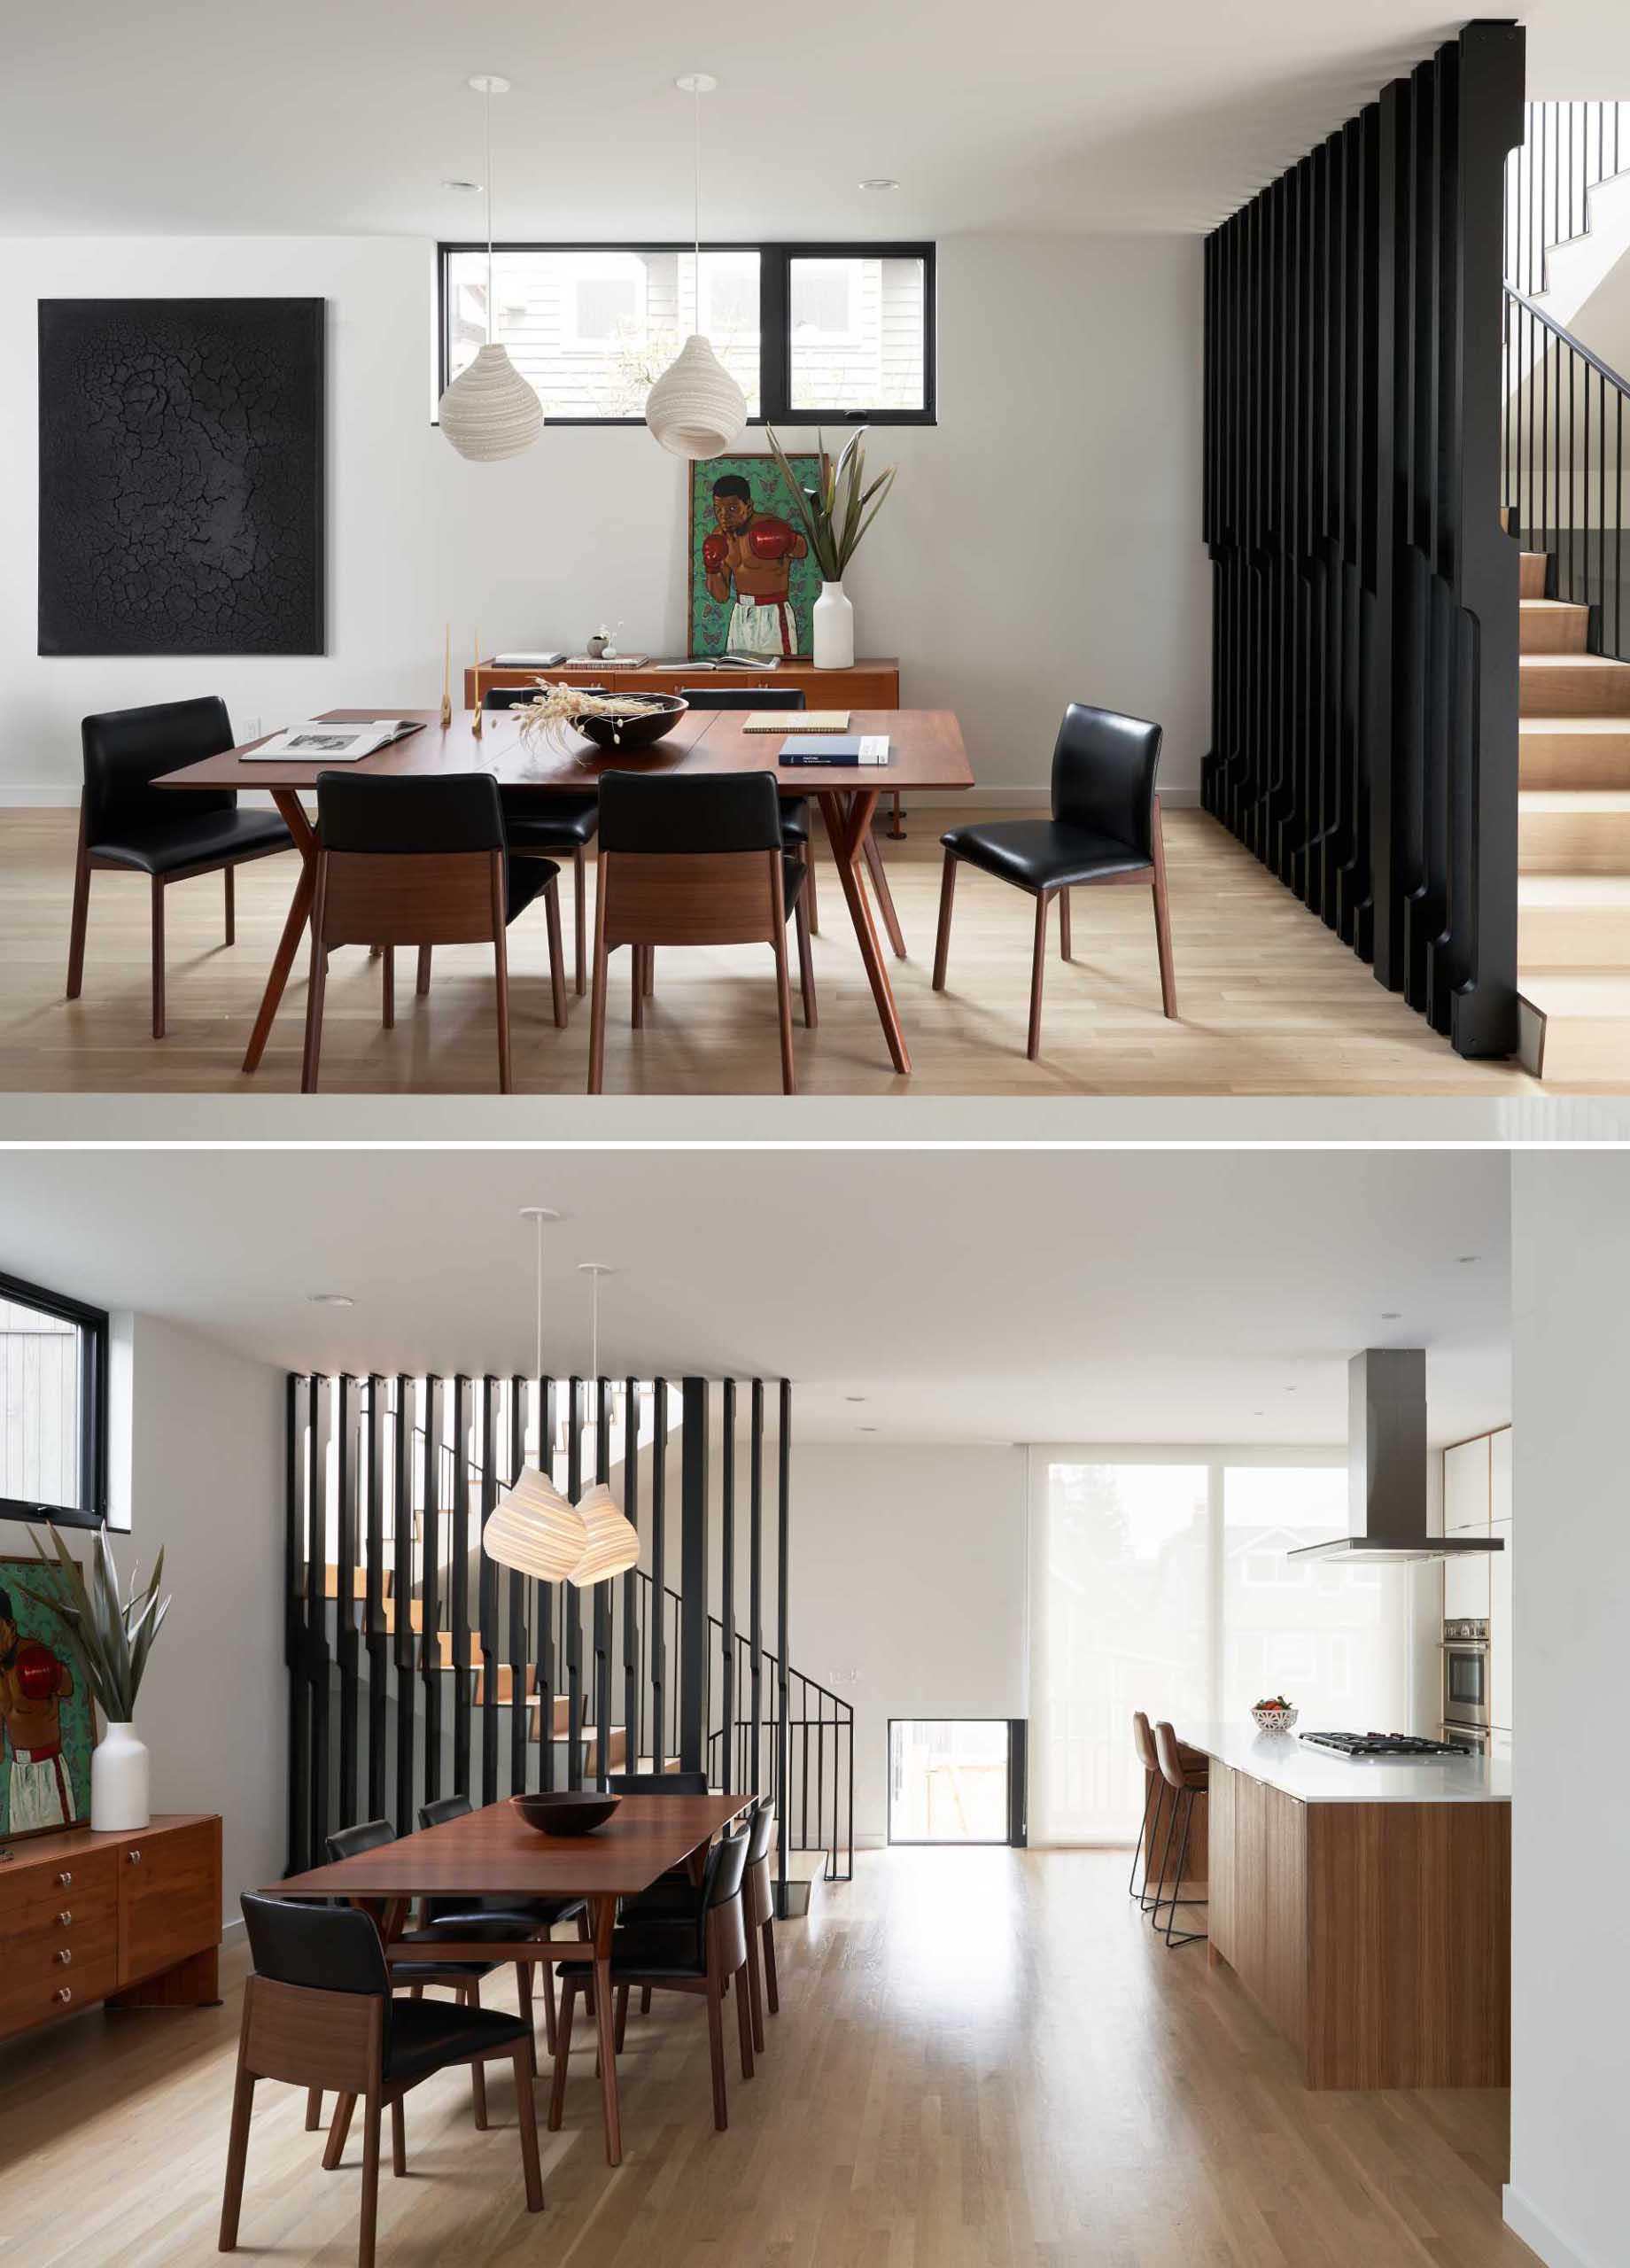 A modern dining room with a warm wood table and a pair of sculptural pendant lights.